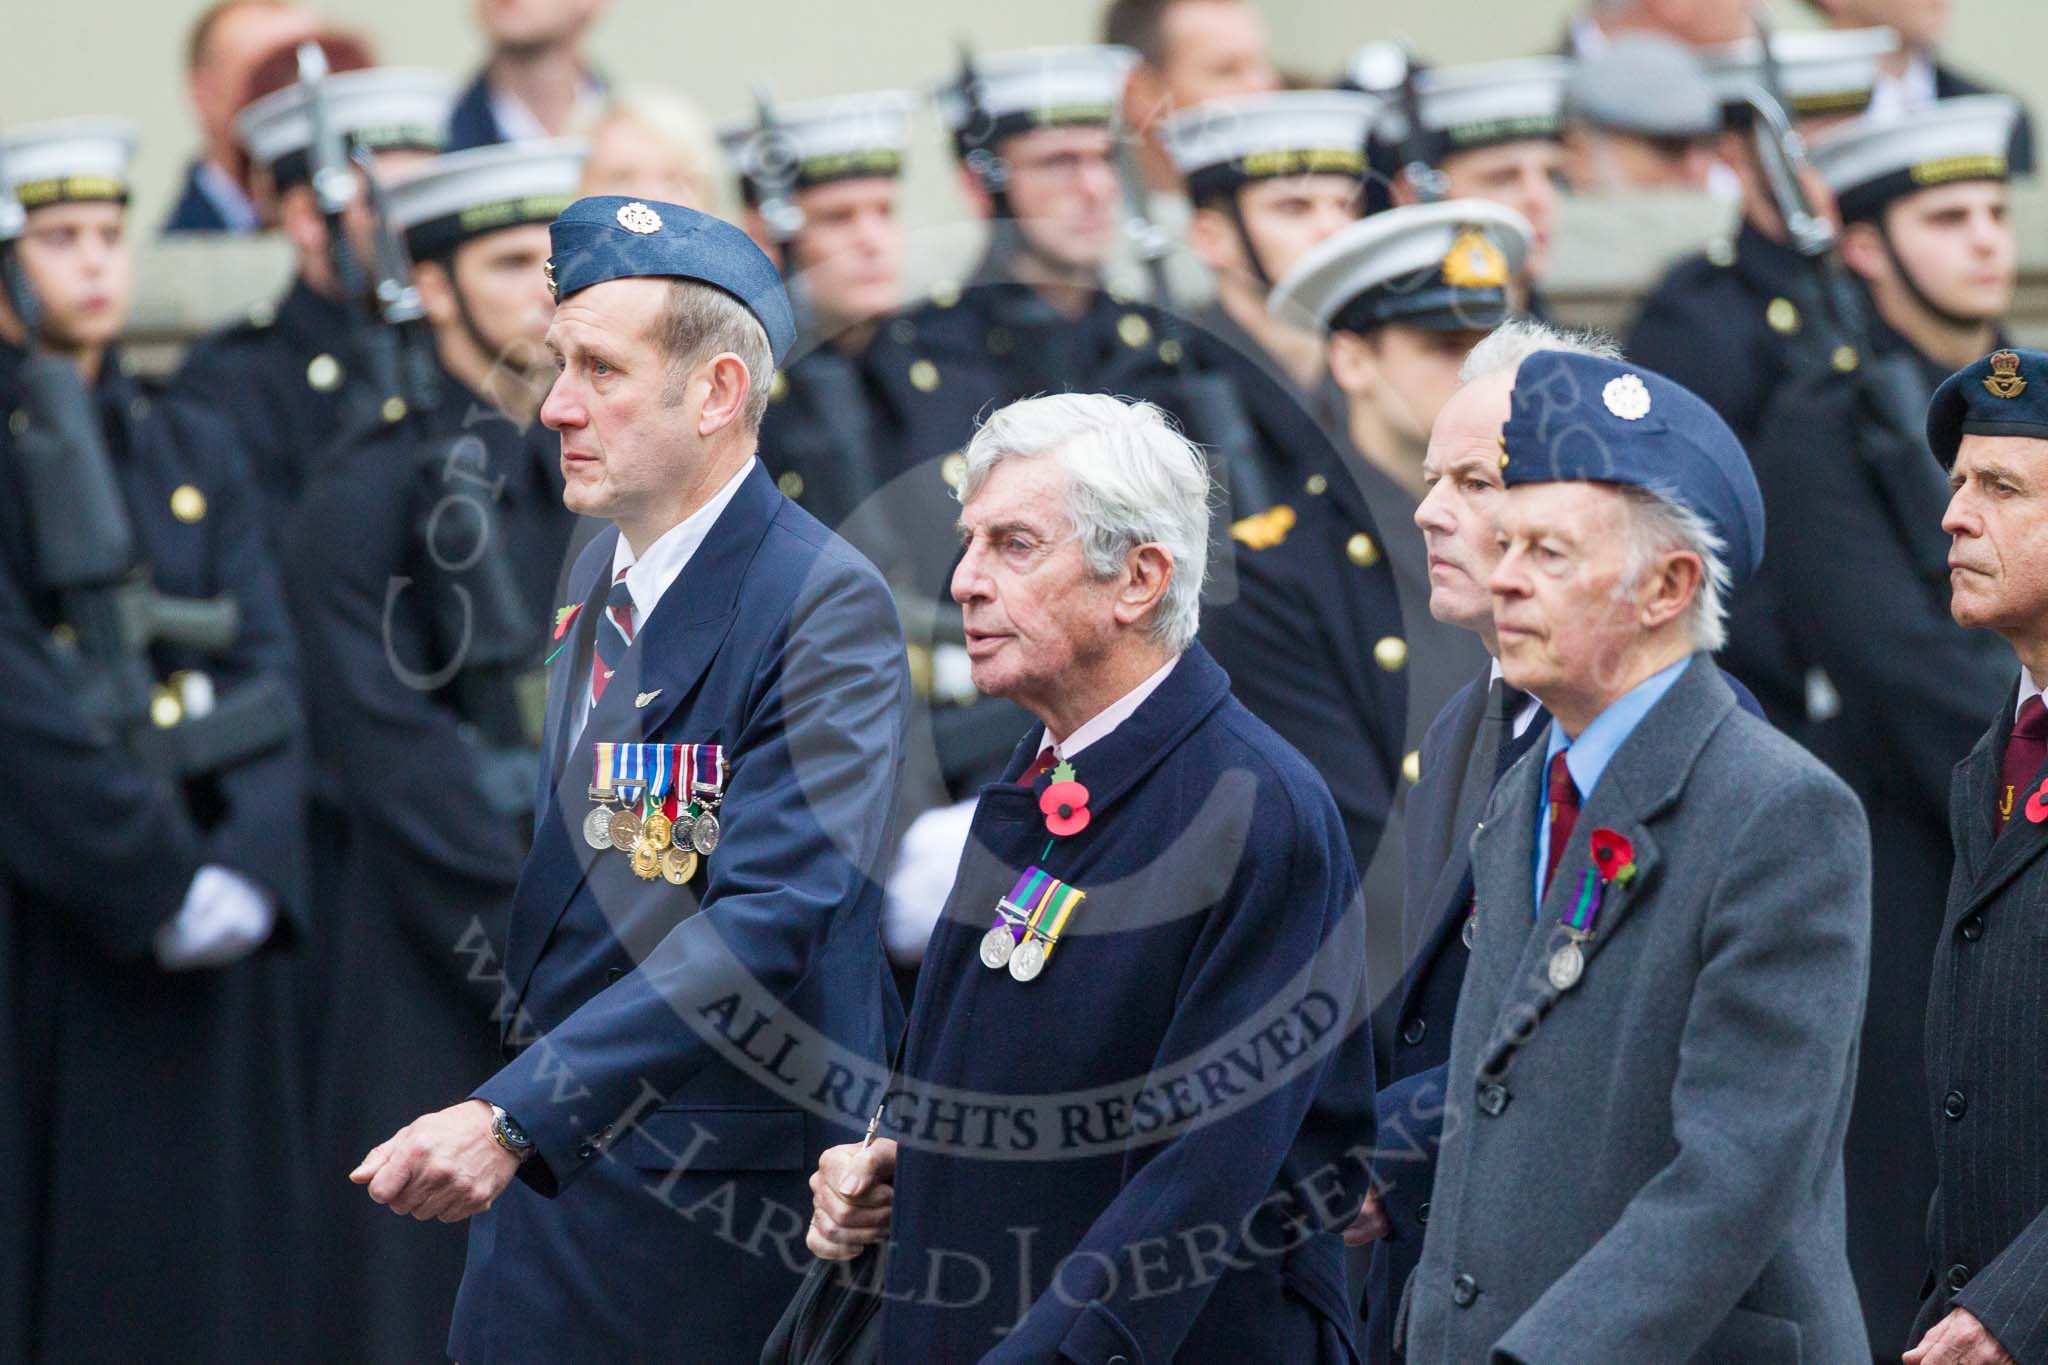 Remembrance Sunday at the Cenotaph 2015: Group C9, 8 Squadron Association (New for 2015).
Cenotaph, Whitehall, London SW1,
London,
Greater London,
United Kingdom,
on 08 November 2015 at 11:48, image #478